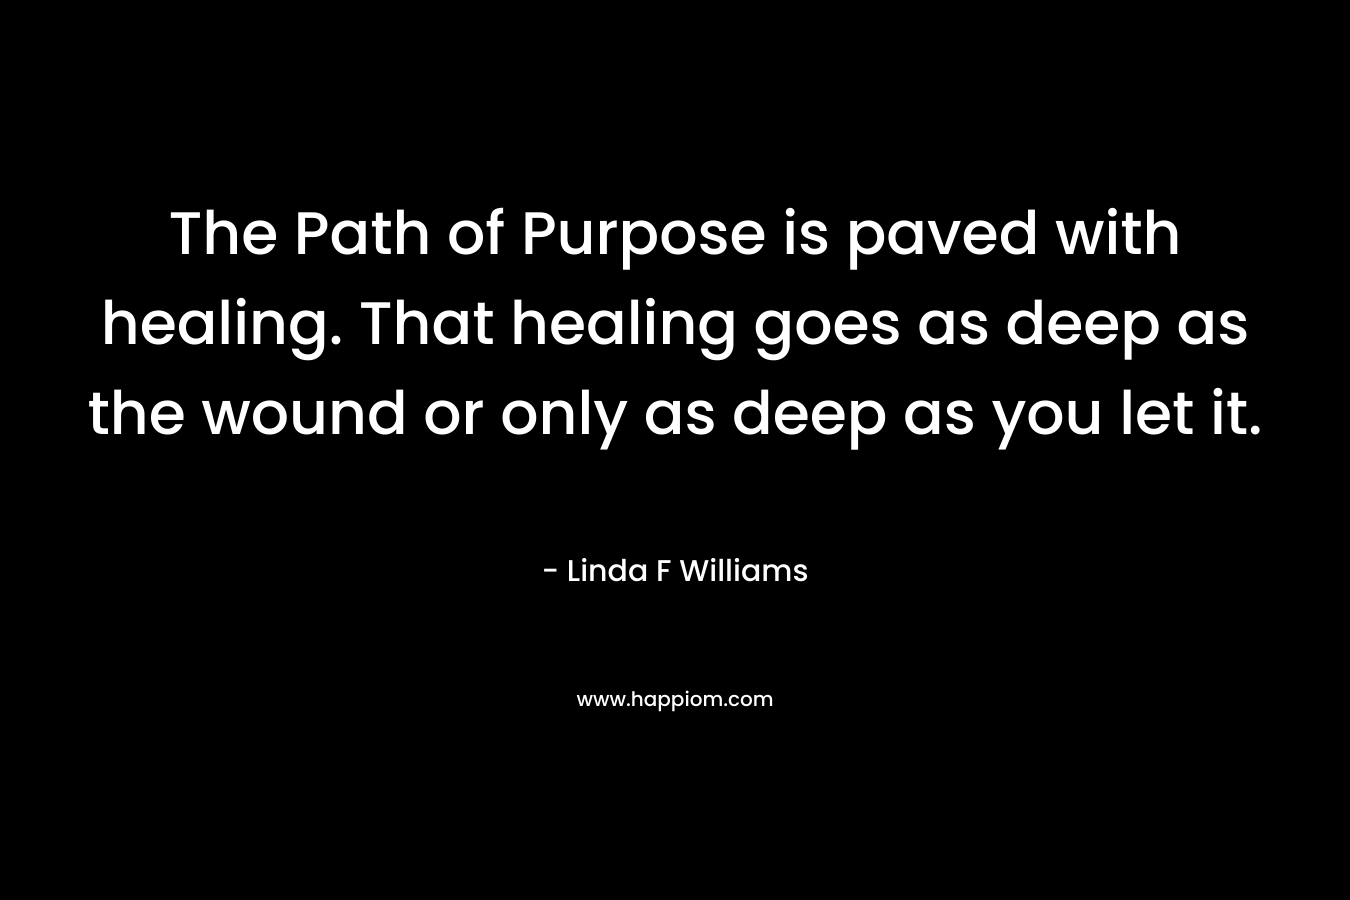 The Path of Purpose is paved with healing. That healing goes as deep as the wound or only as deep as you let it.